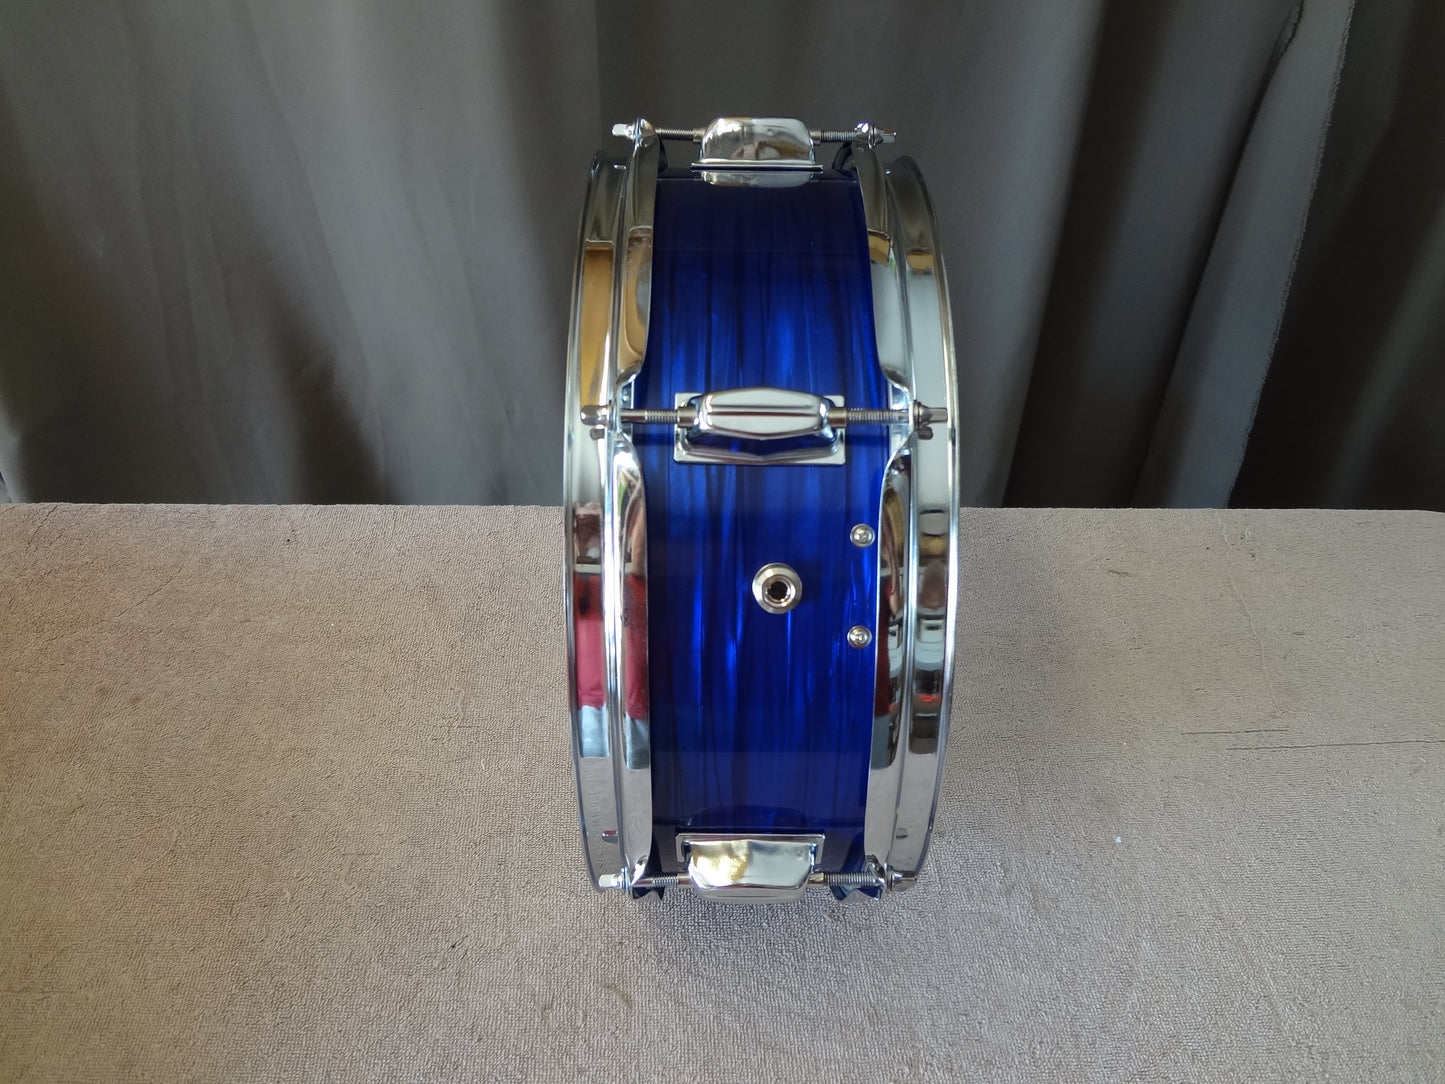 New 13 Inch Custom Electronic Snare Drum - Blue Oyster